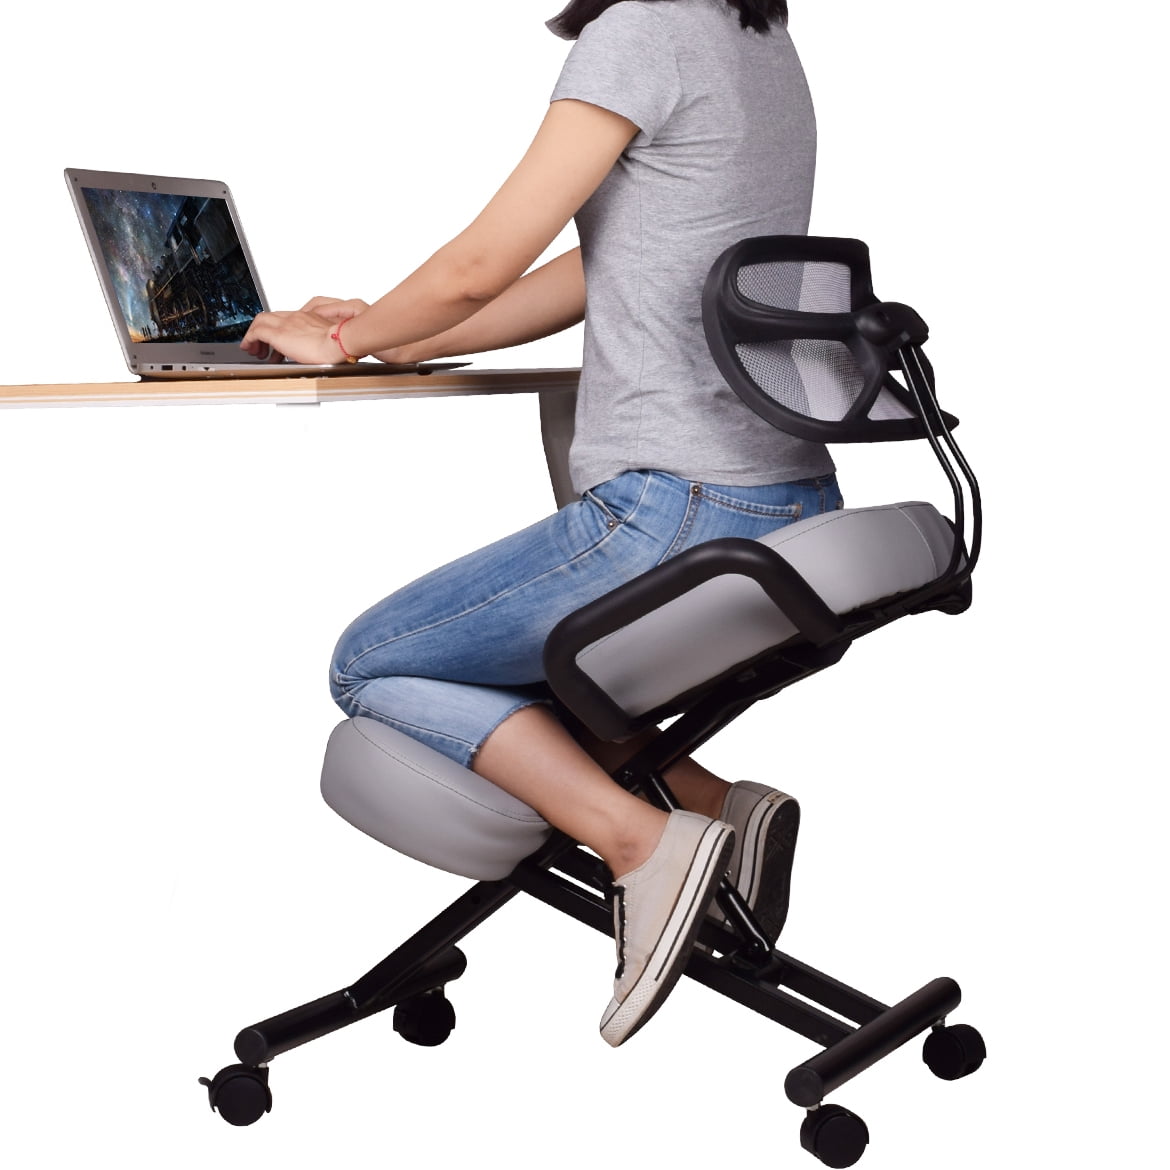 Dragonn By Vivo Ergonomic Kneeling Chair With Back Support For Home And Office Angled Posture Seat Gray Dn Ch K02g Walmart Com Walmart Com